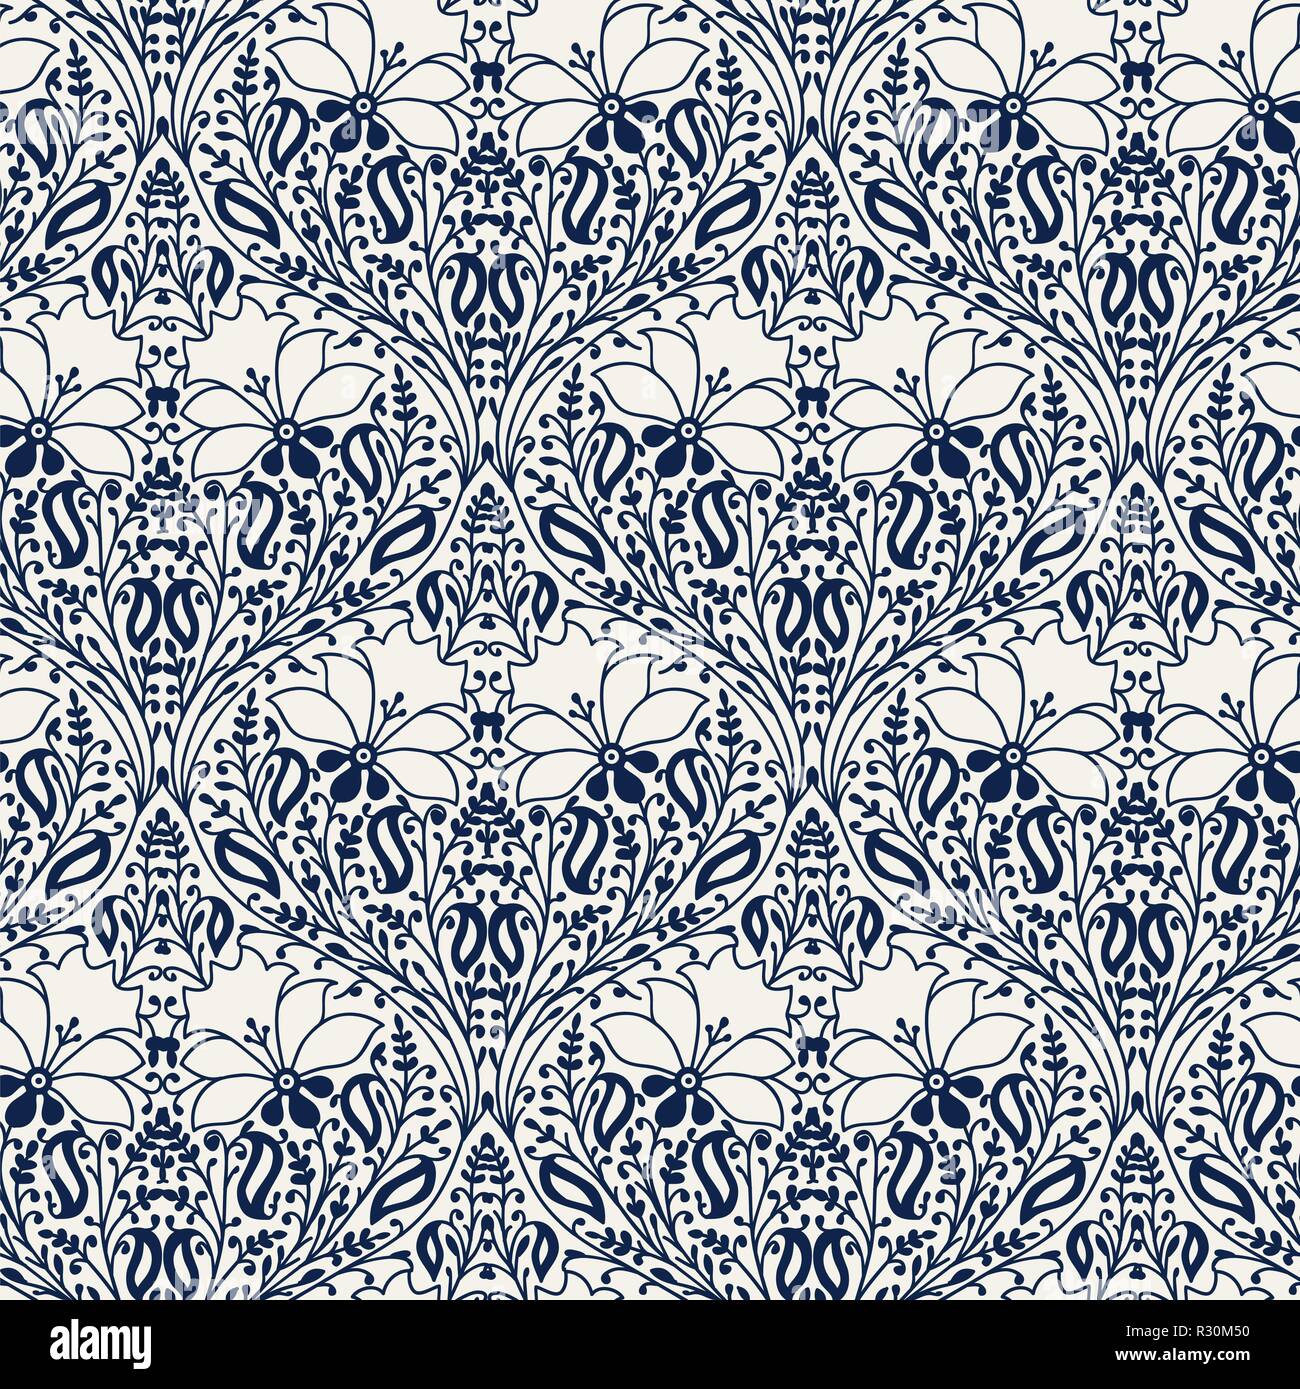 Indigo dye woodblock printed seamless ethnic floral pattern. Traditional oriental ornament of India, damask of flowers and leaves, navy blue on ecru Stock Vector